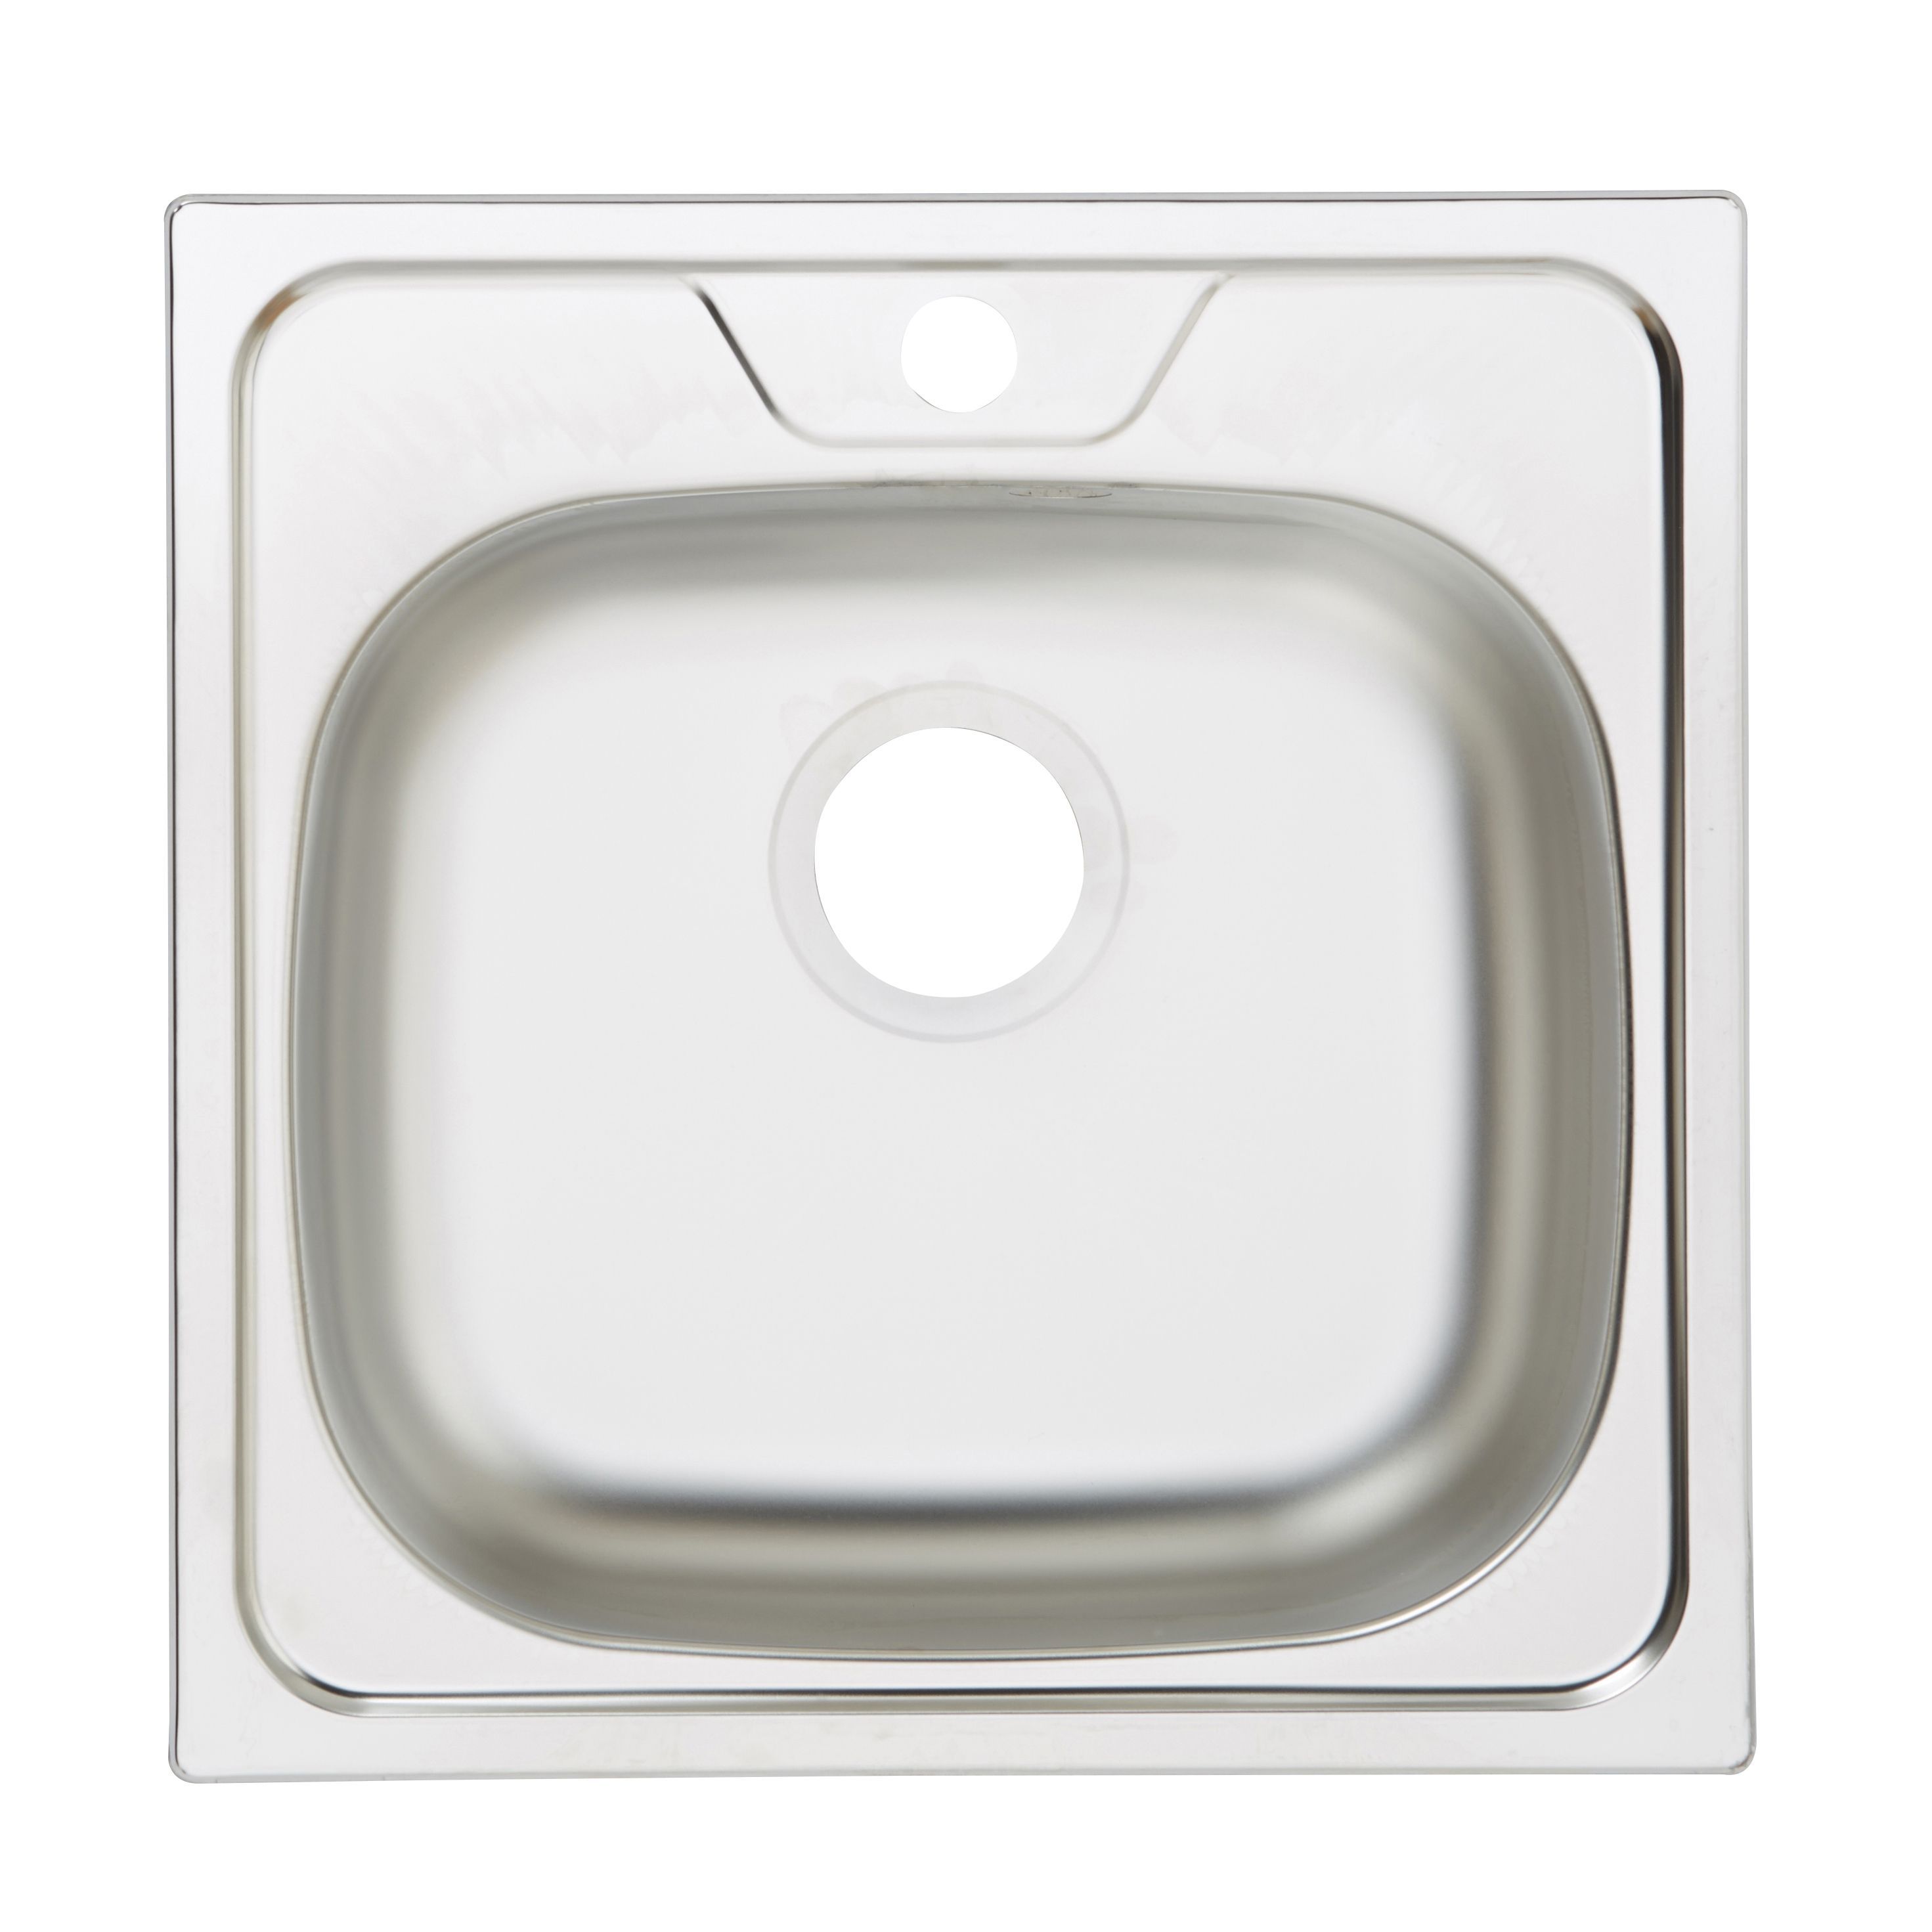 Gamow Inox Stainless steel 1 Bowl Compact sink 480mm x 480mm